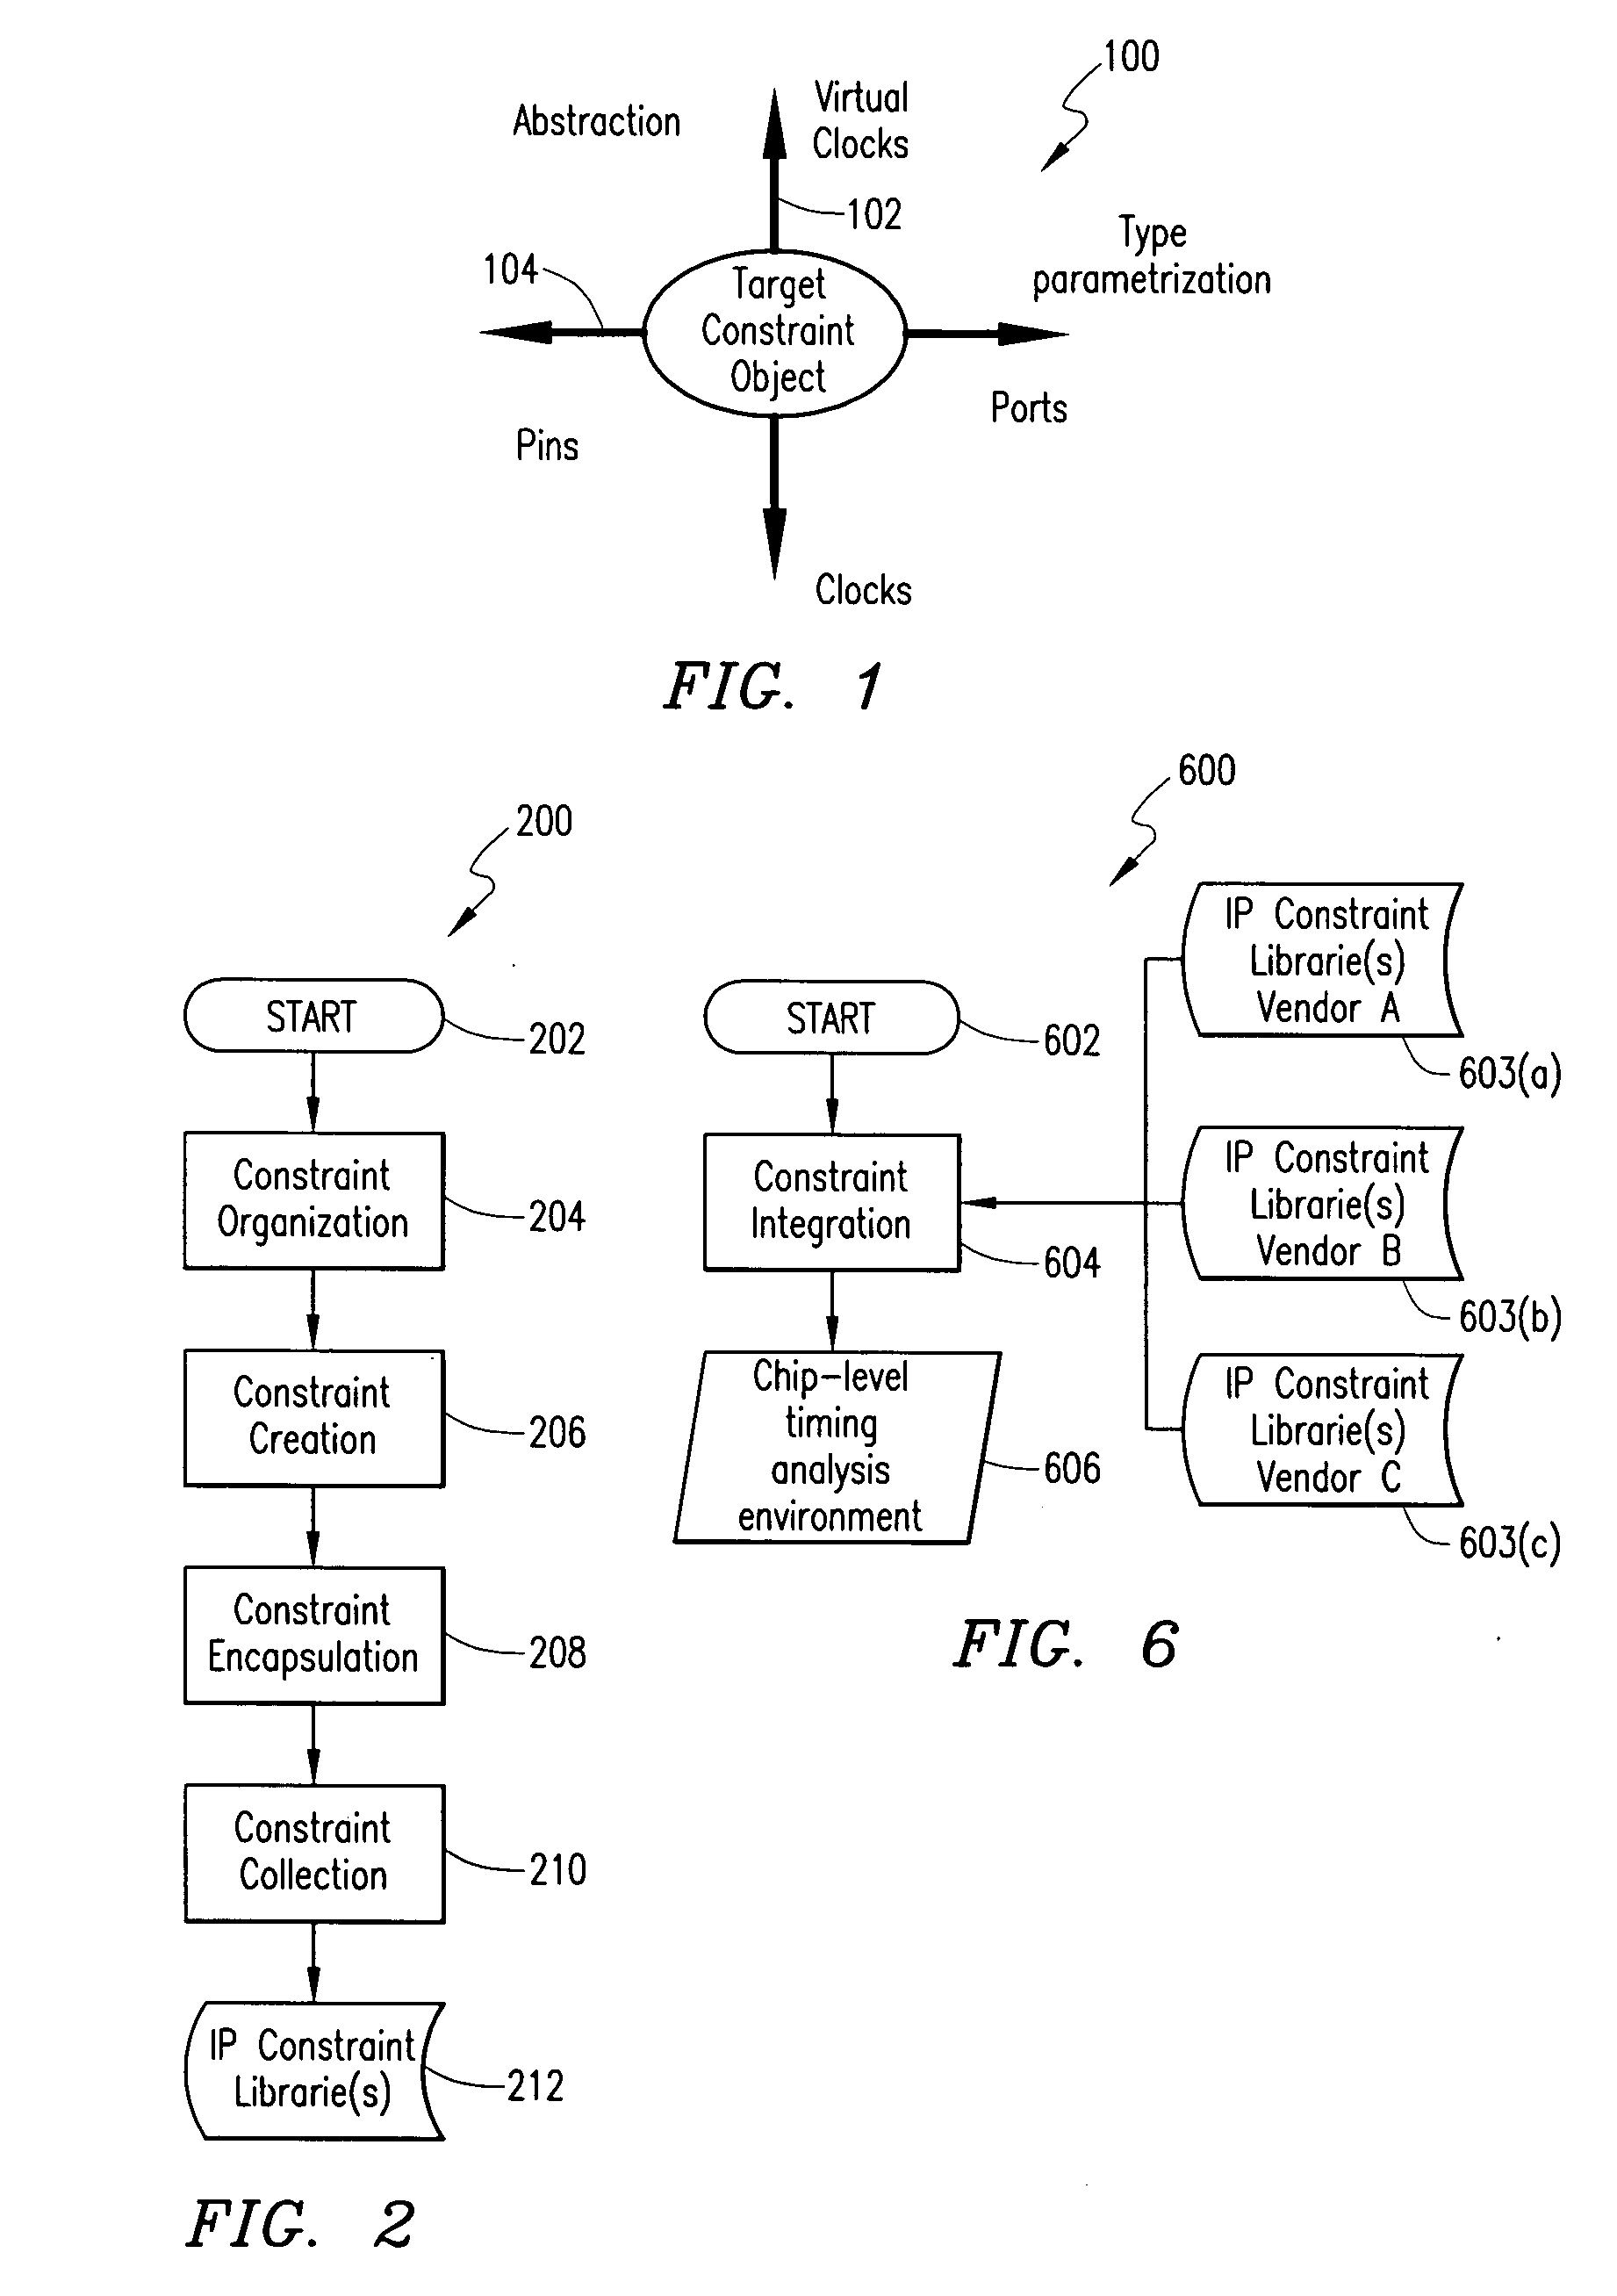 Method for specification and integration of reusable IP constraints